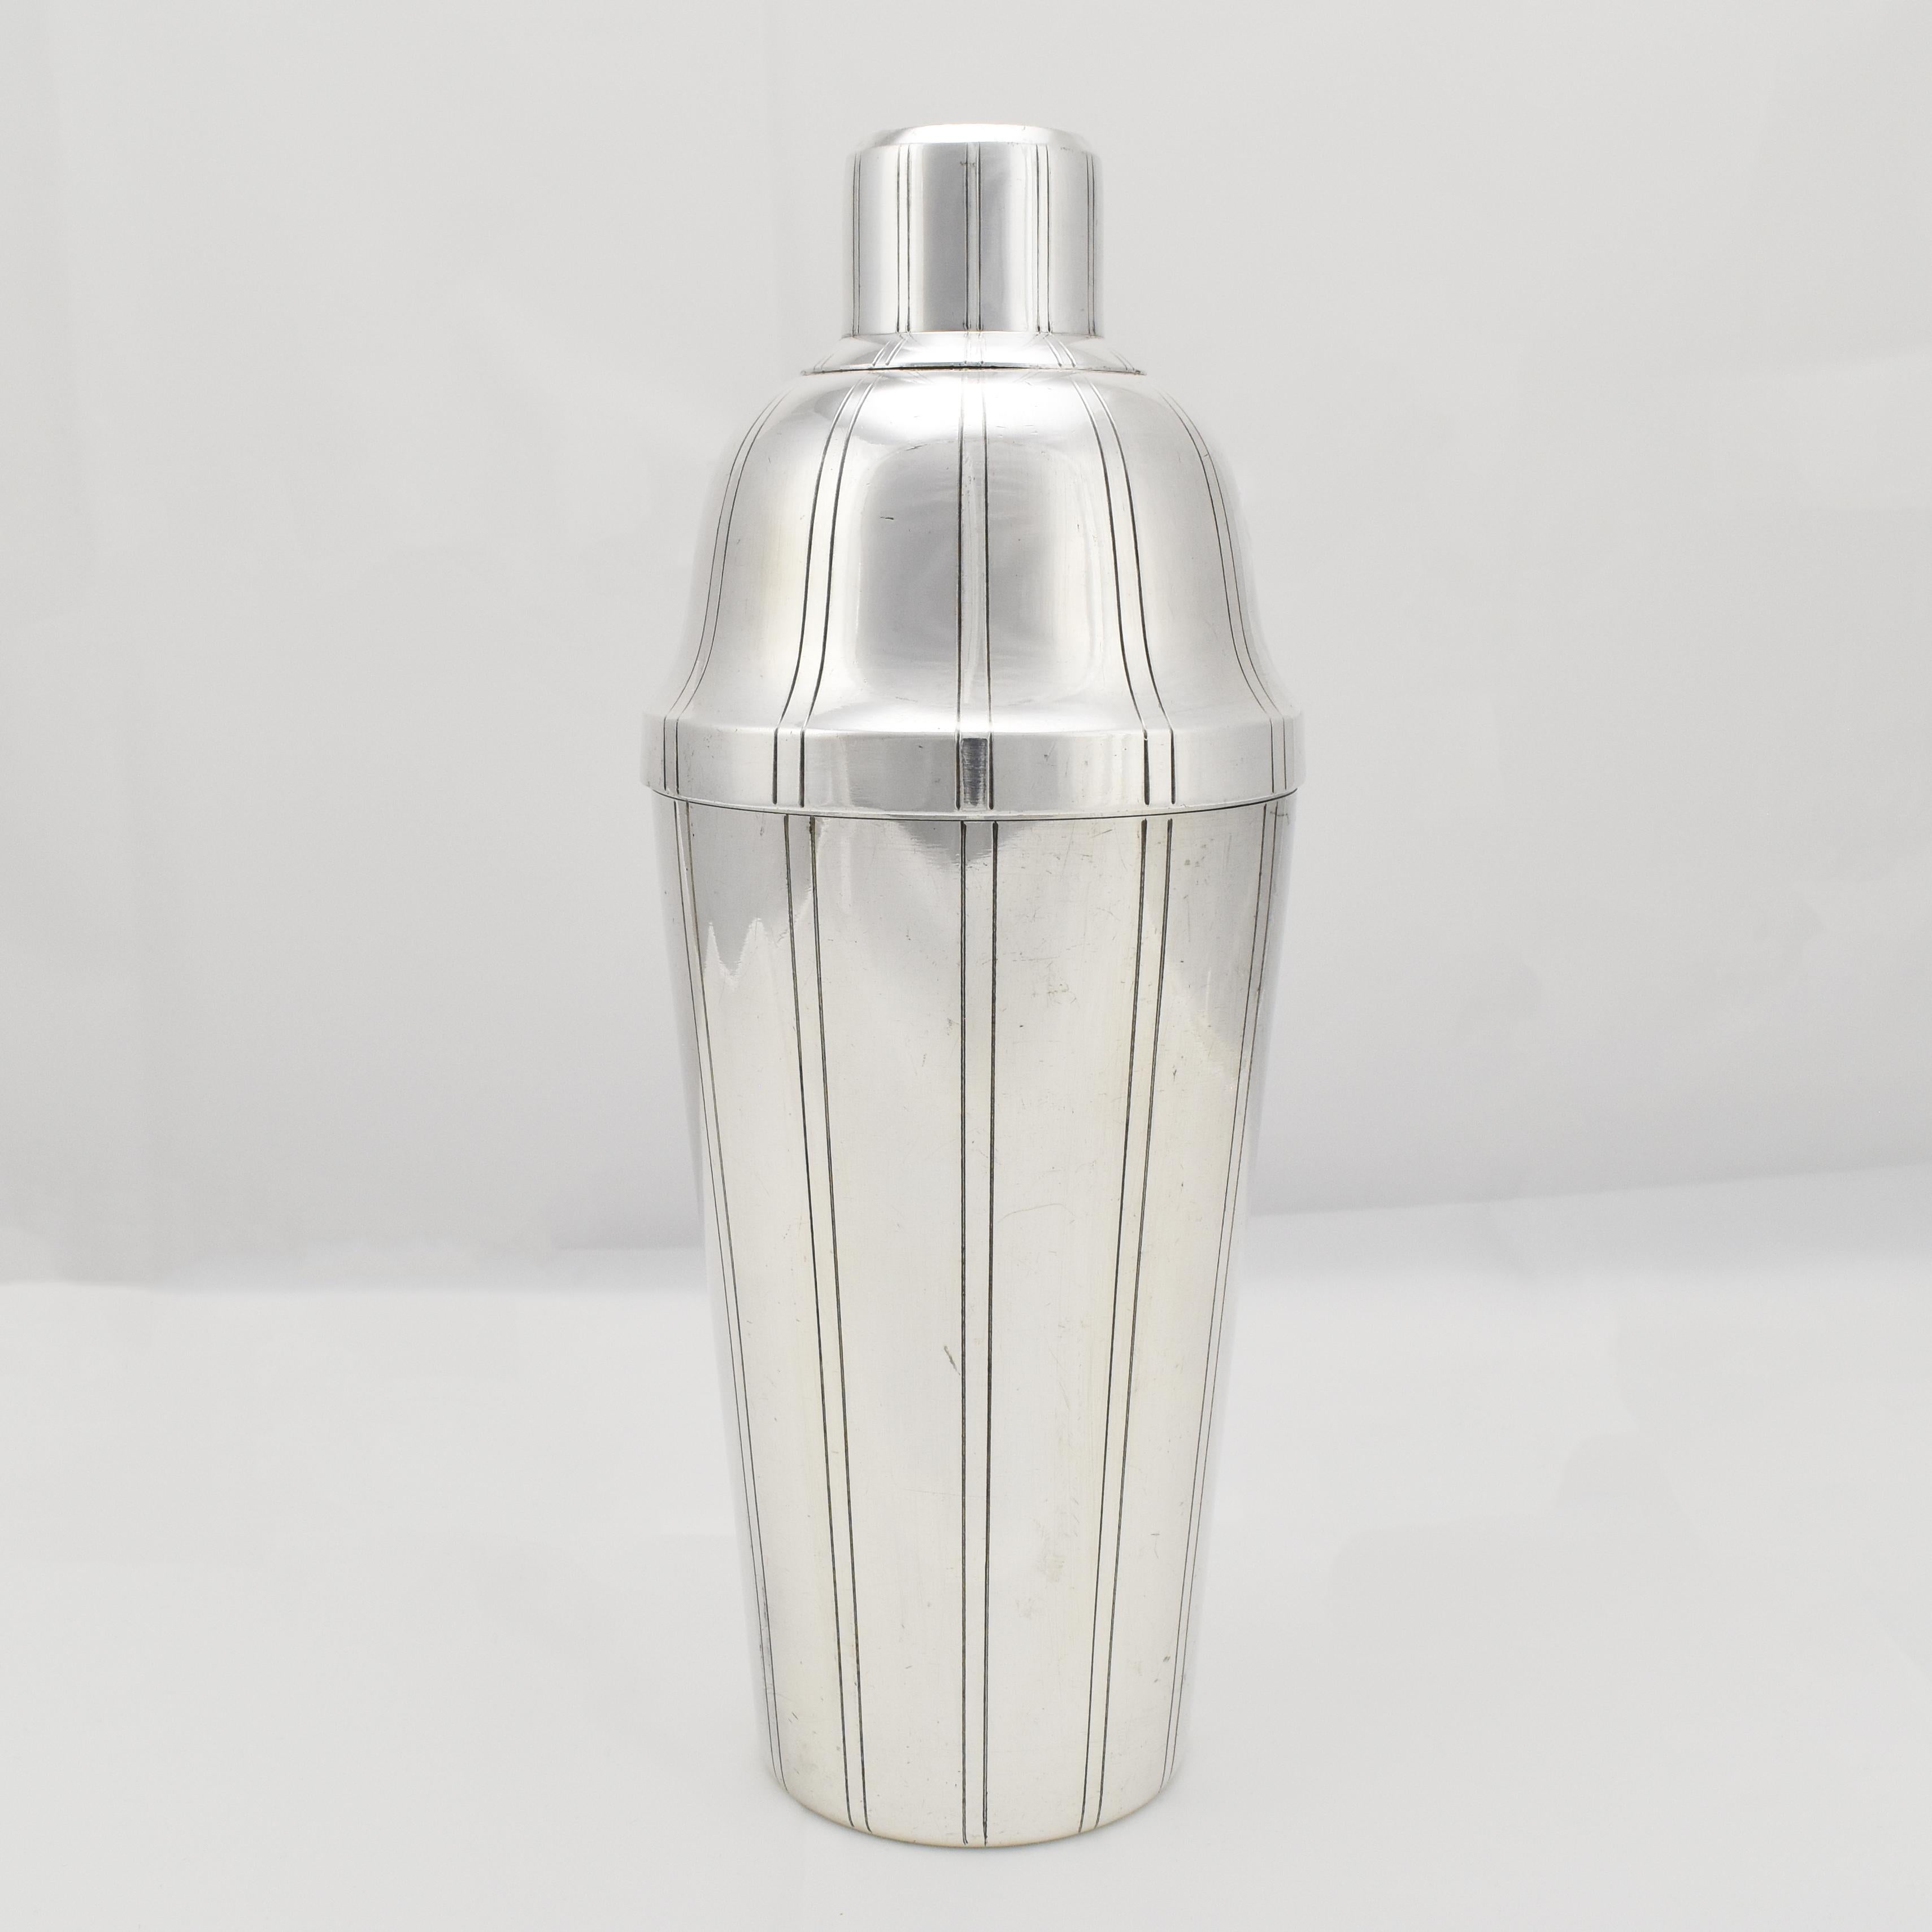 This vintage cocktail shaker is a pure and elegant designed piece, crafted from silverplated brass by the well-known French manufacturer Charles Boulenger.

The shape features clean lines with a well-proportioned silhouette with minimalist incised